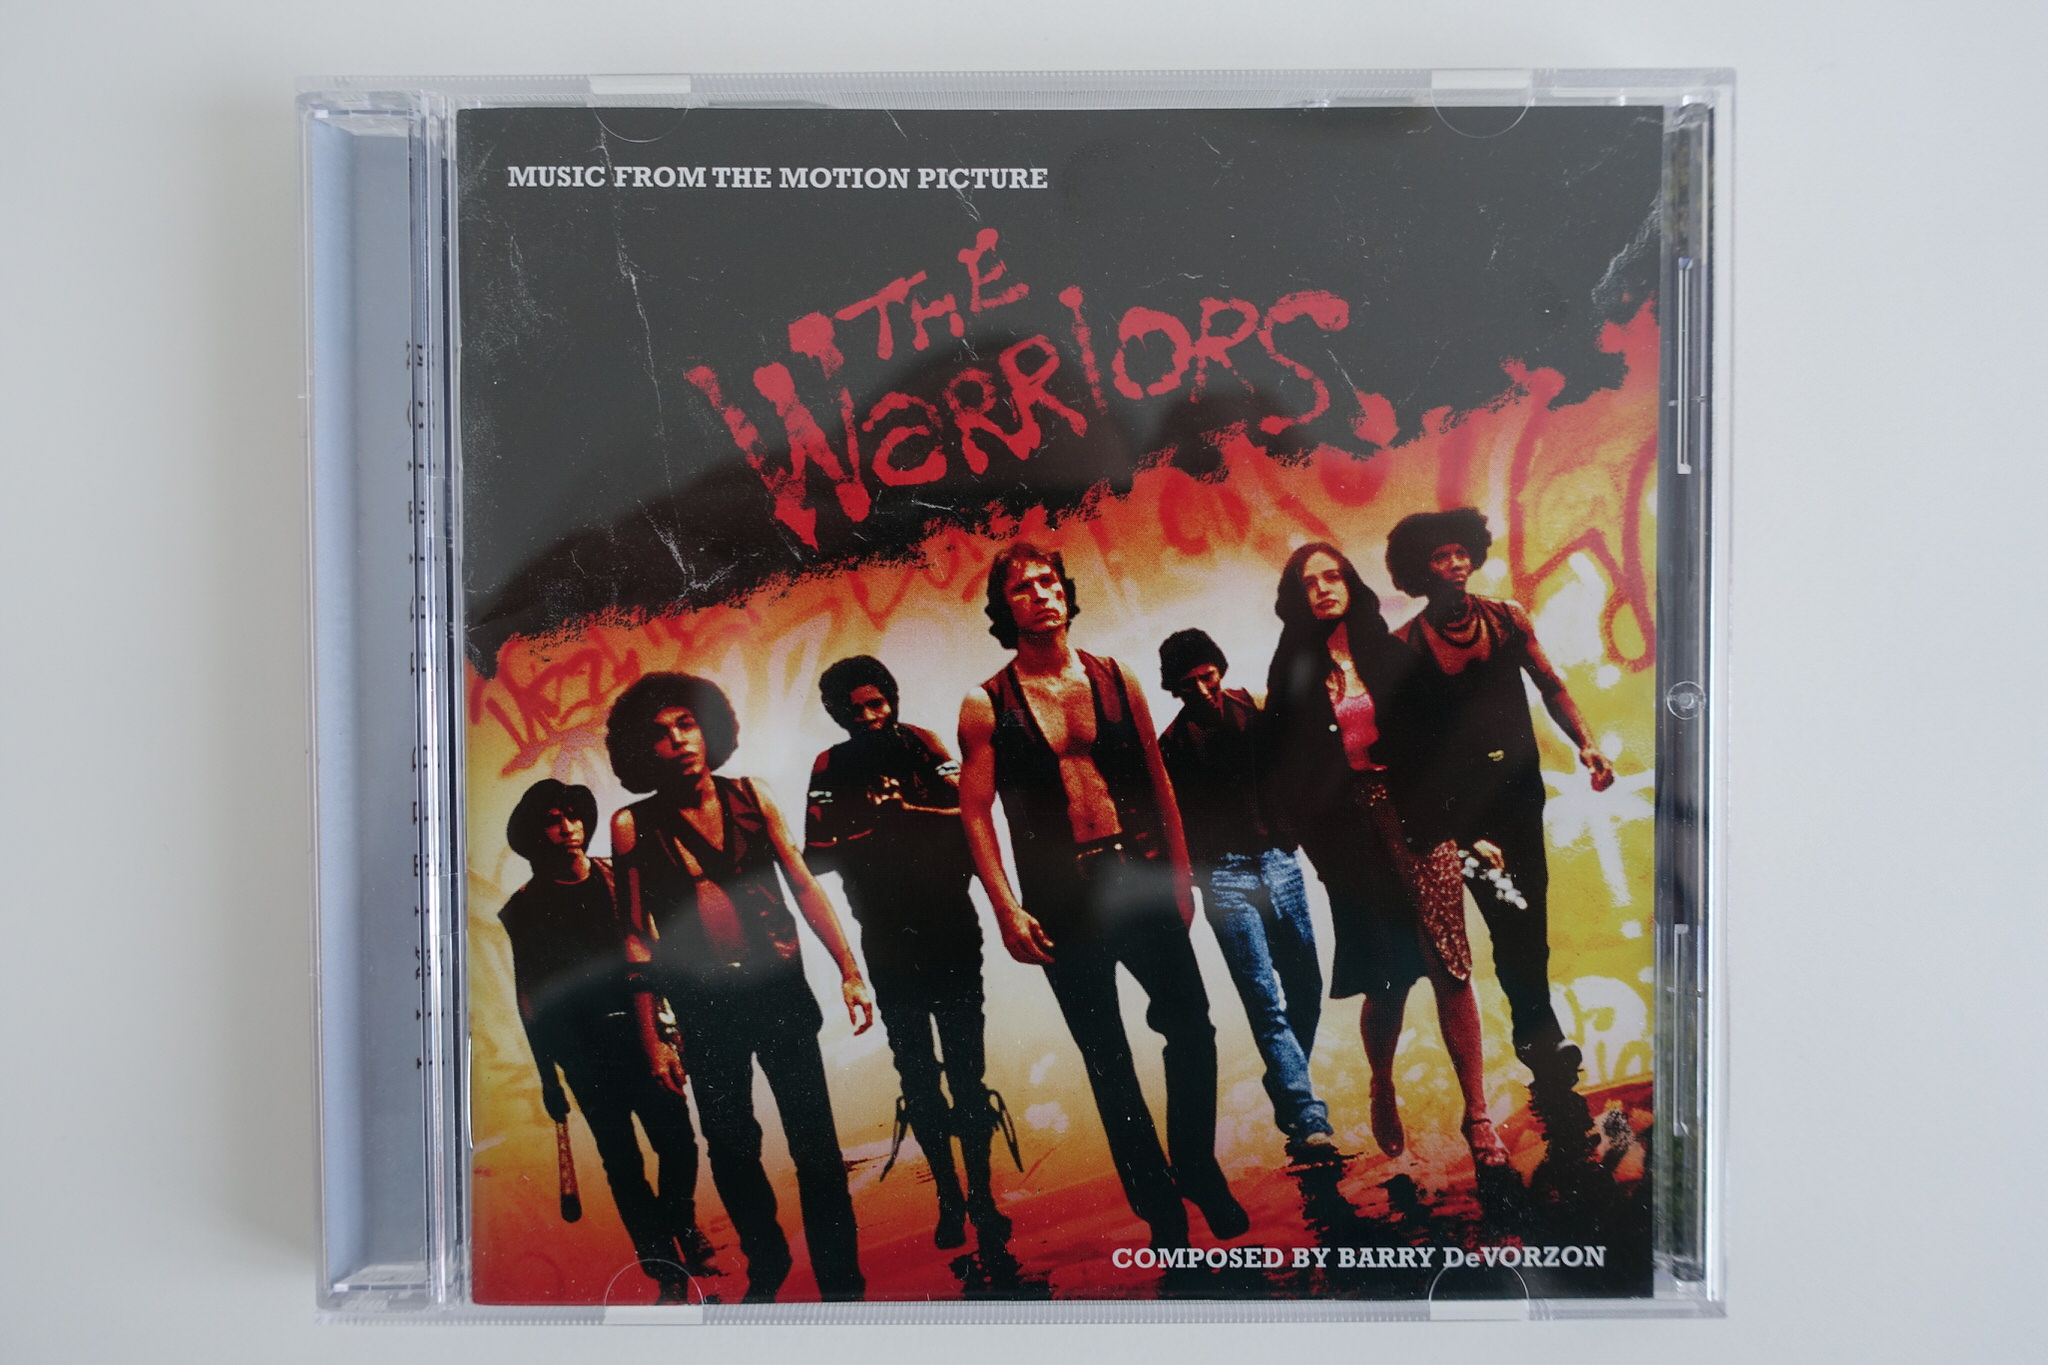 The Warriors Movie Site - Limited Edition Soundtrack